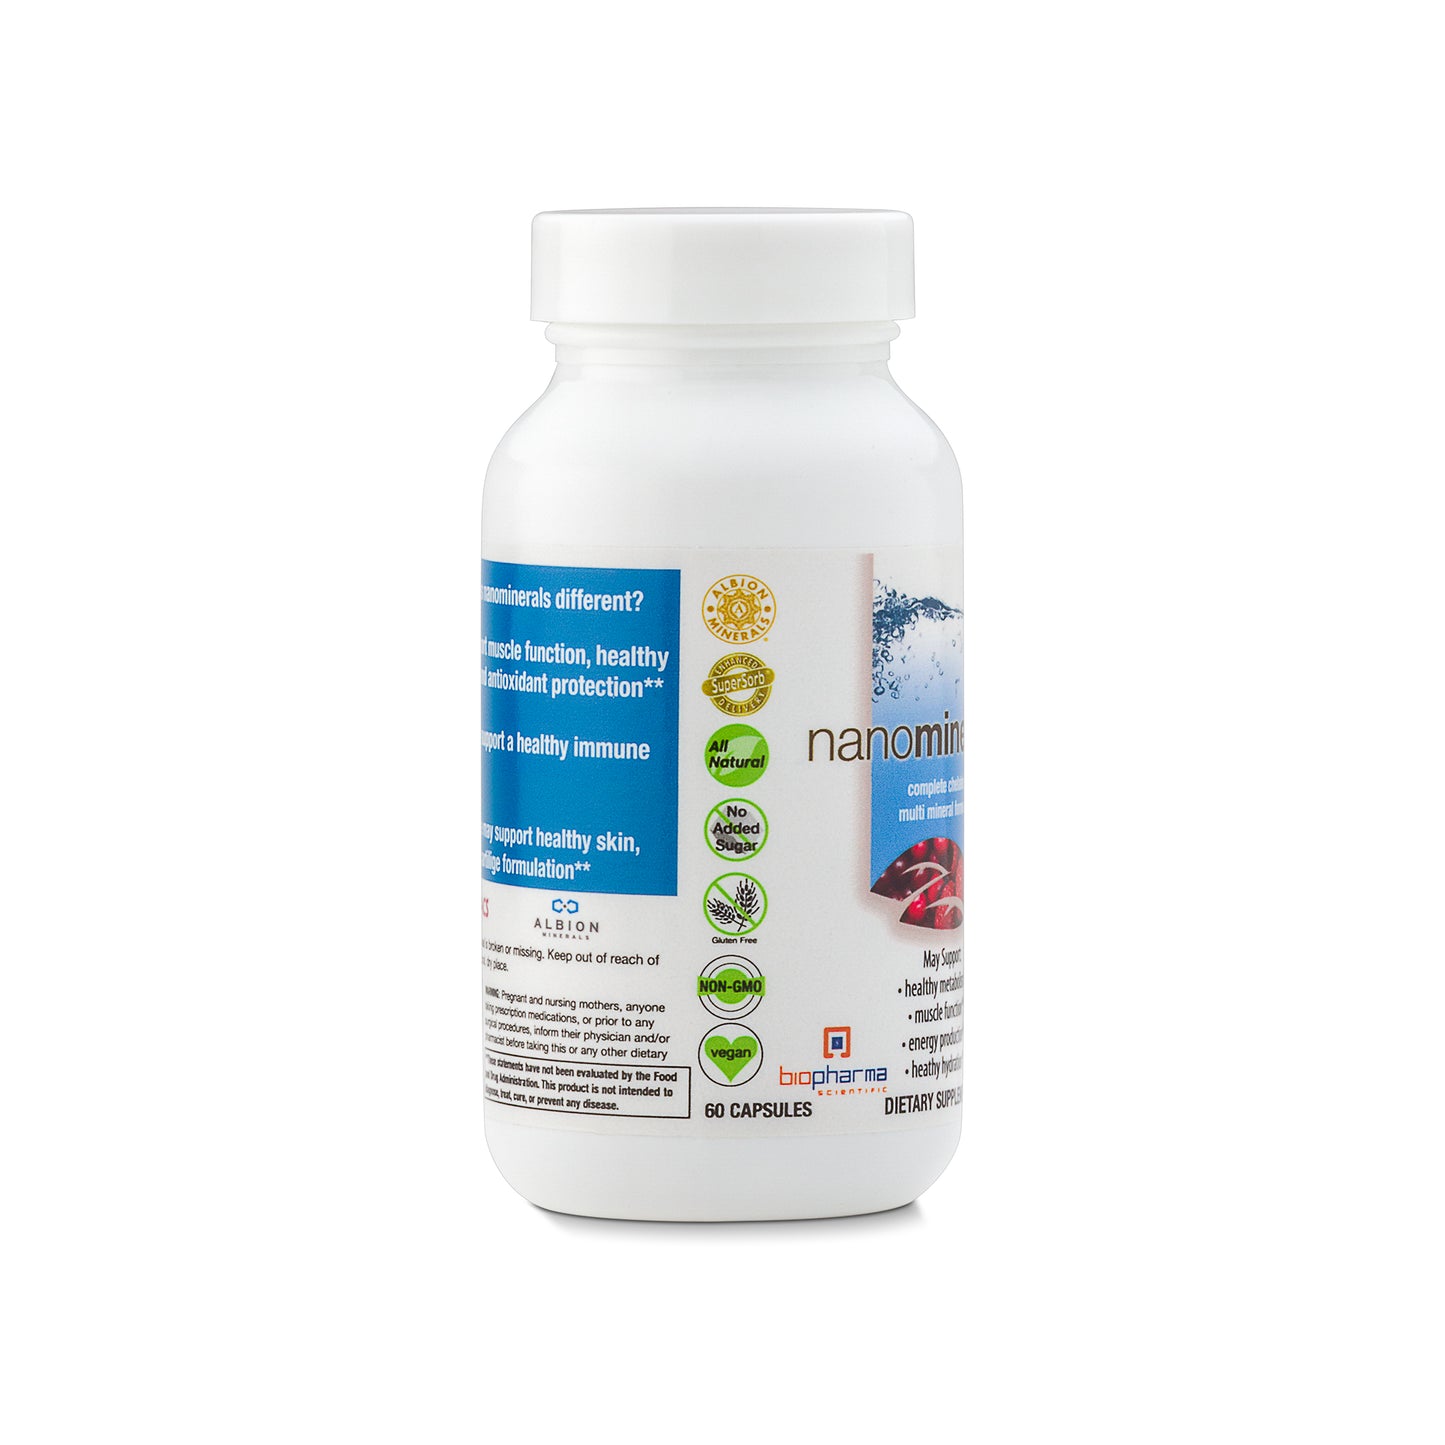 nanominerals complete chelated multi mineral supplement capsule - additional information